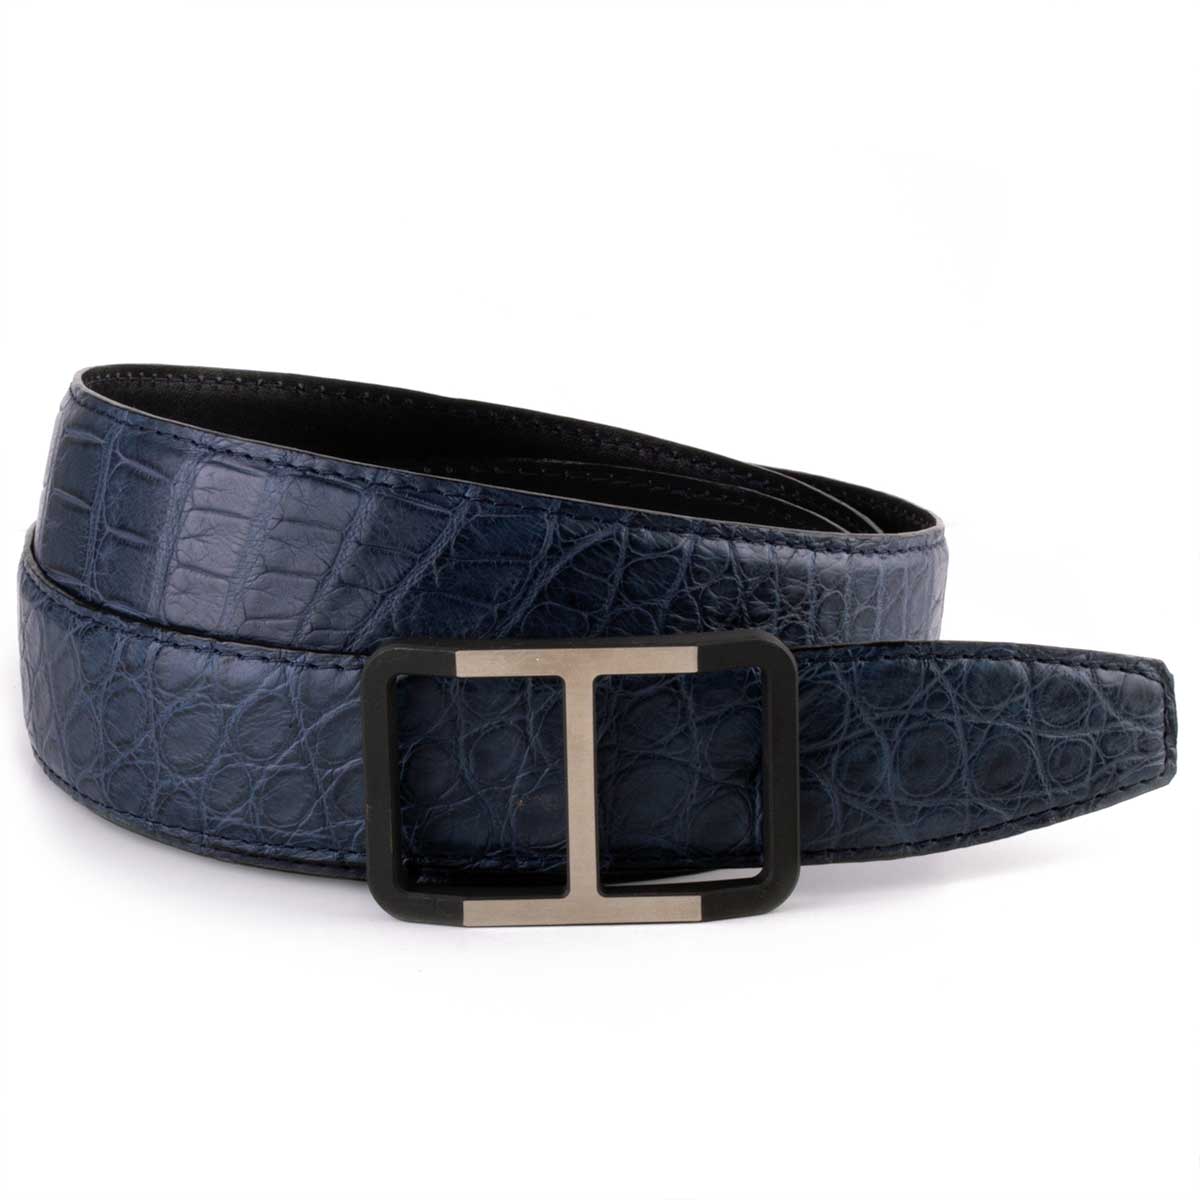 Classic leather belt with black and steel finish "H" buckle - Alligator (black, navy blue, blue)